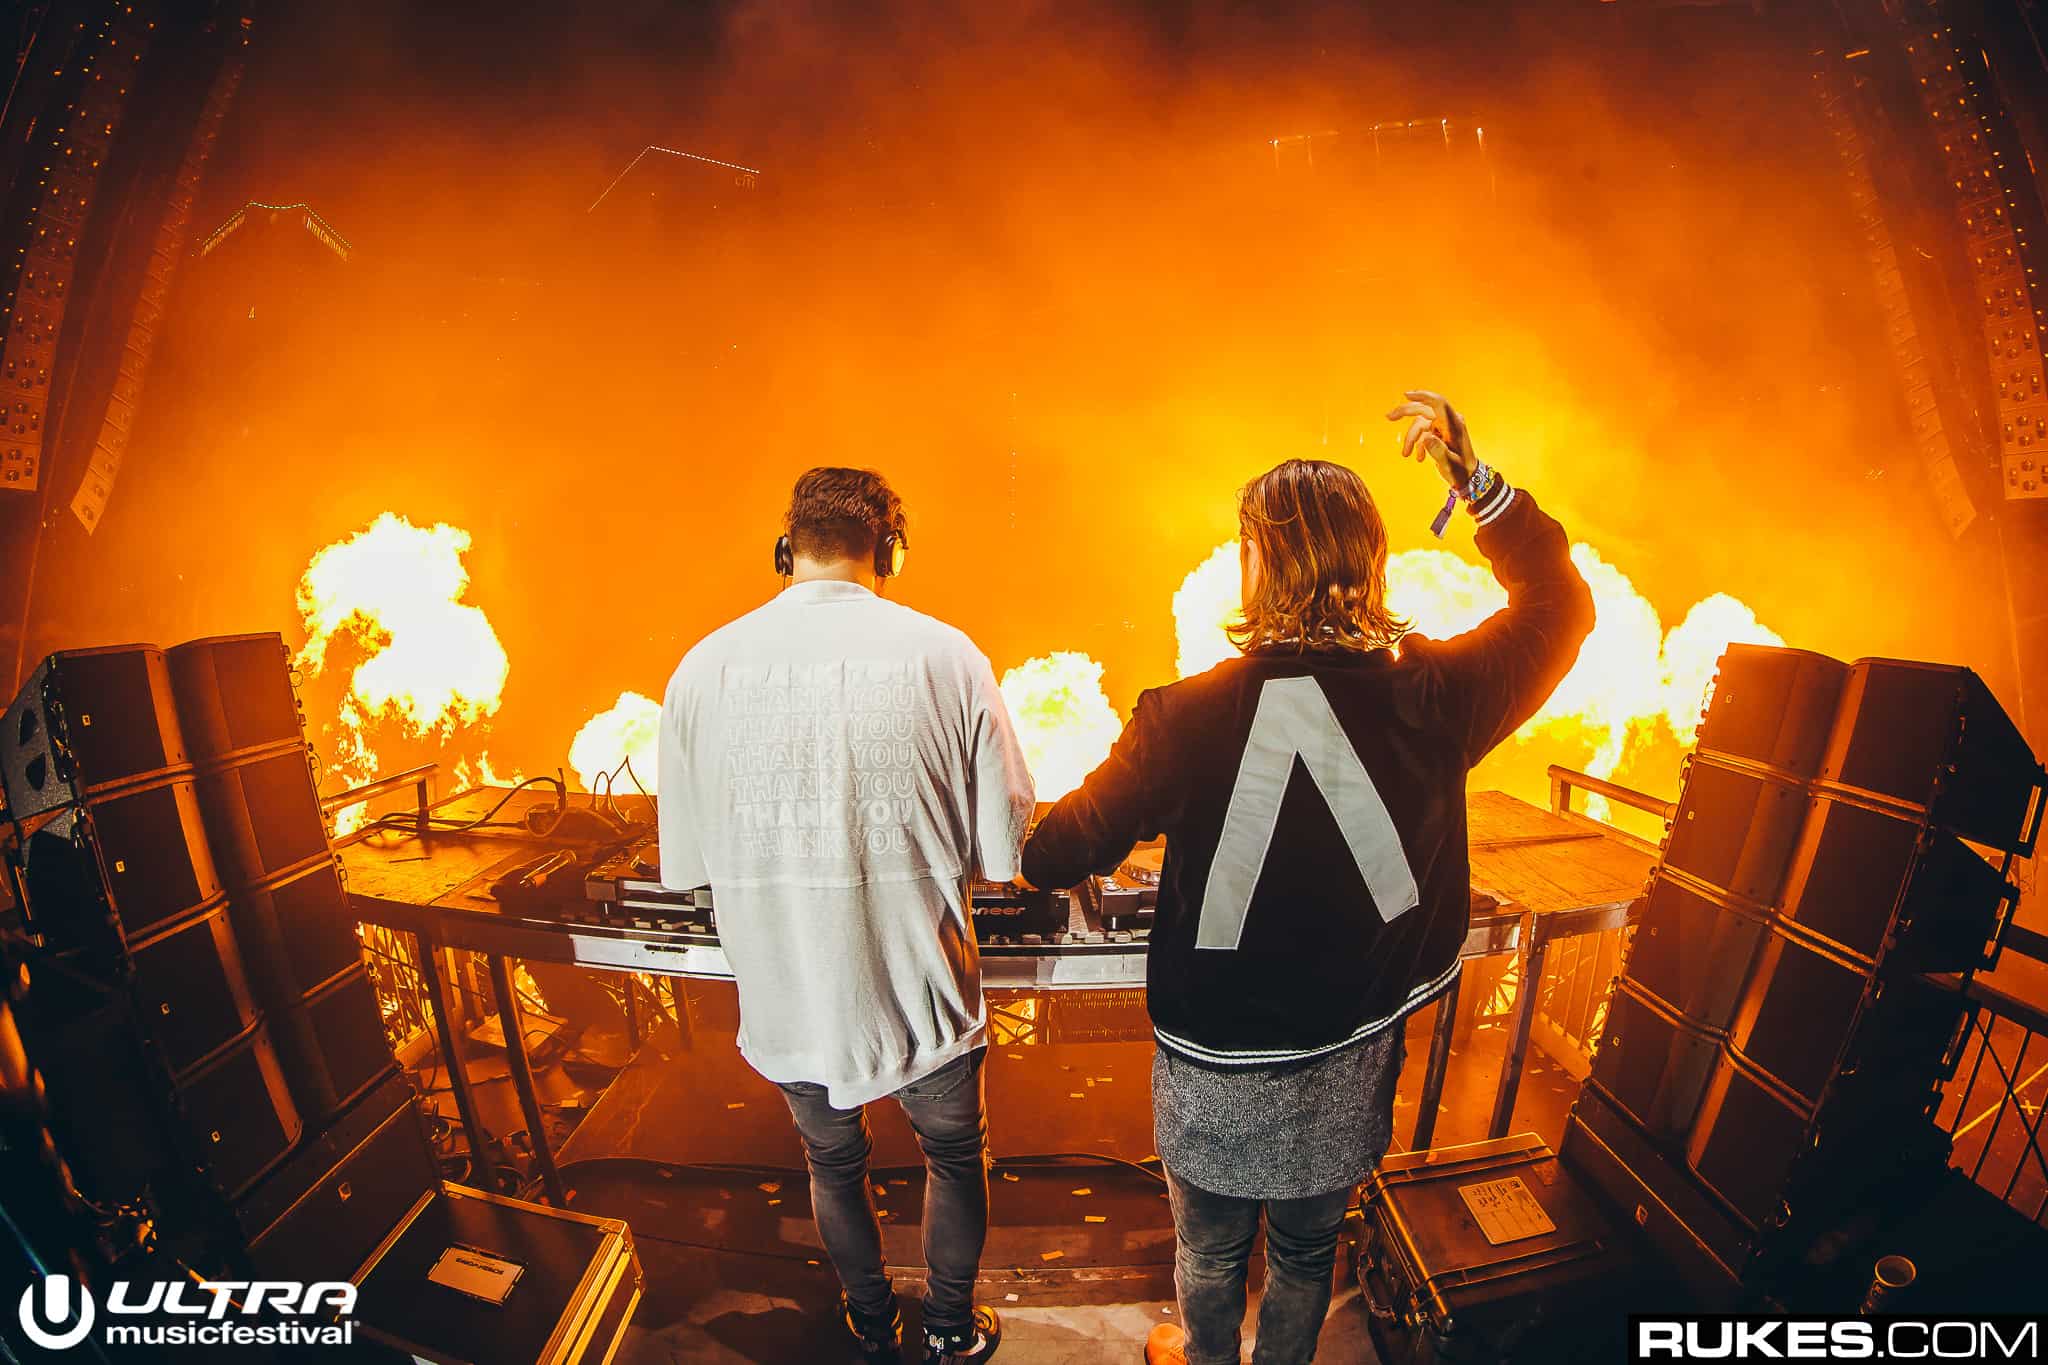 Axwell Λ Ingrosso